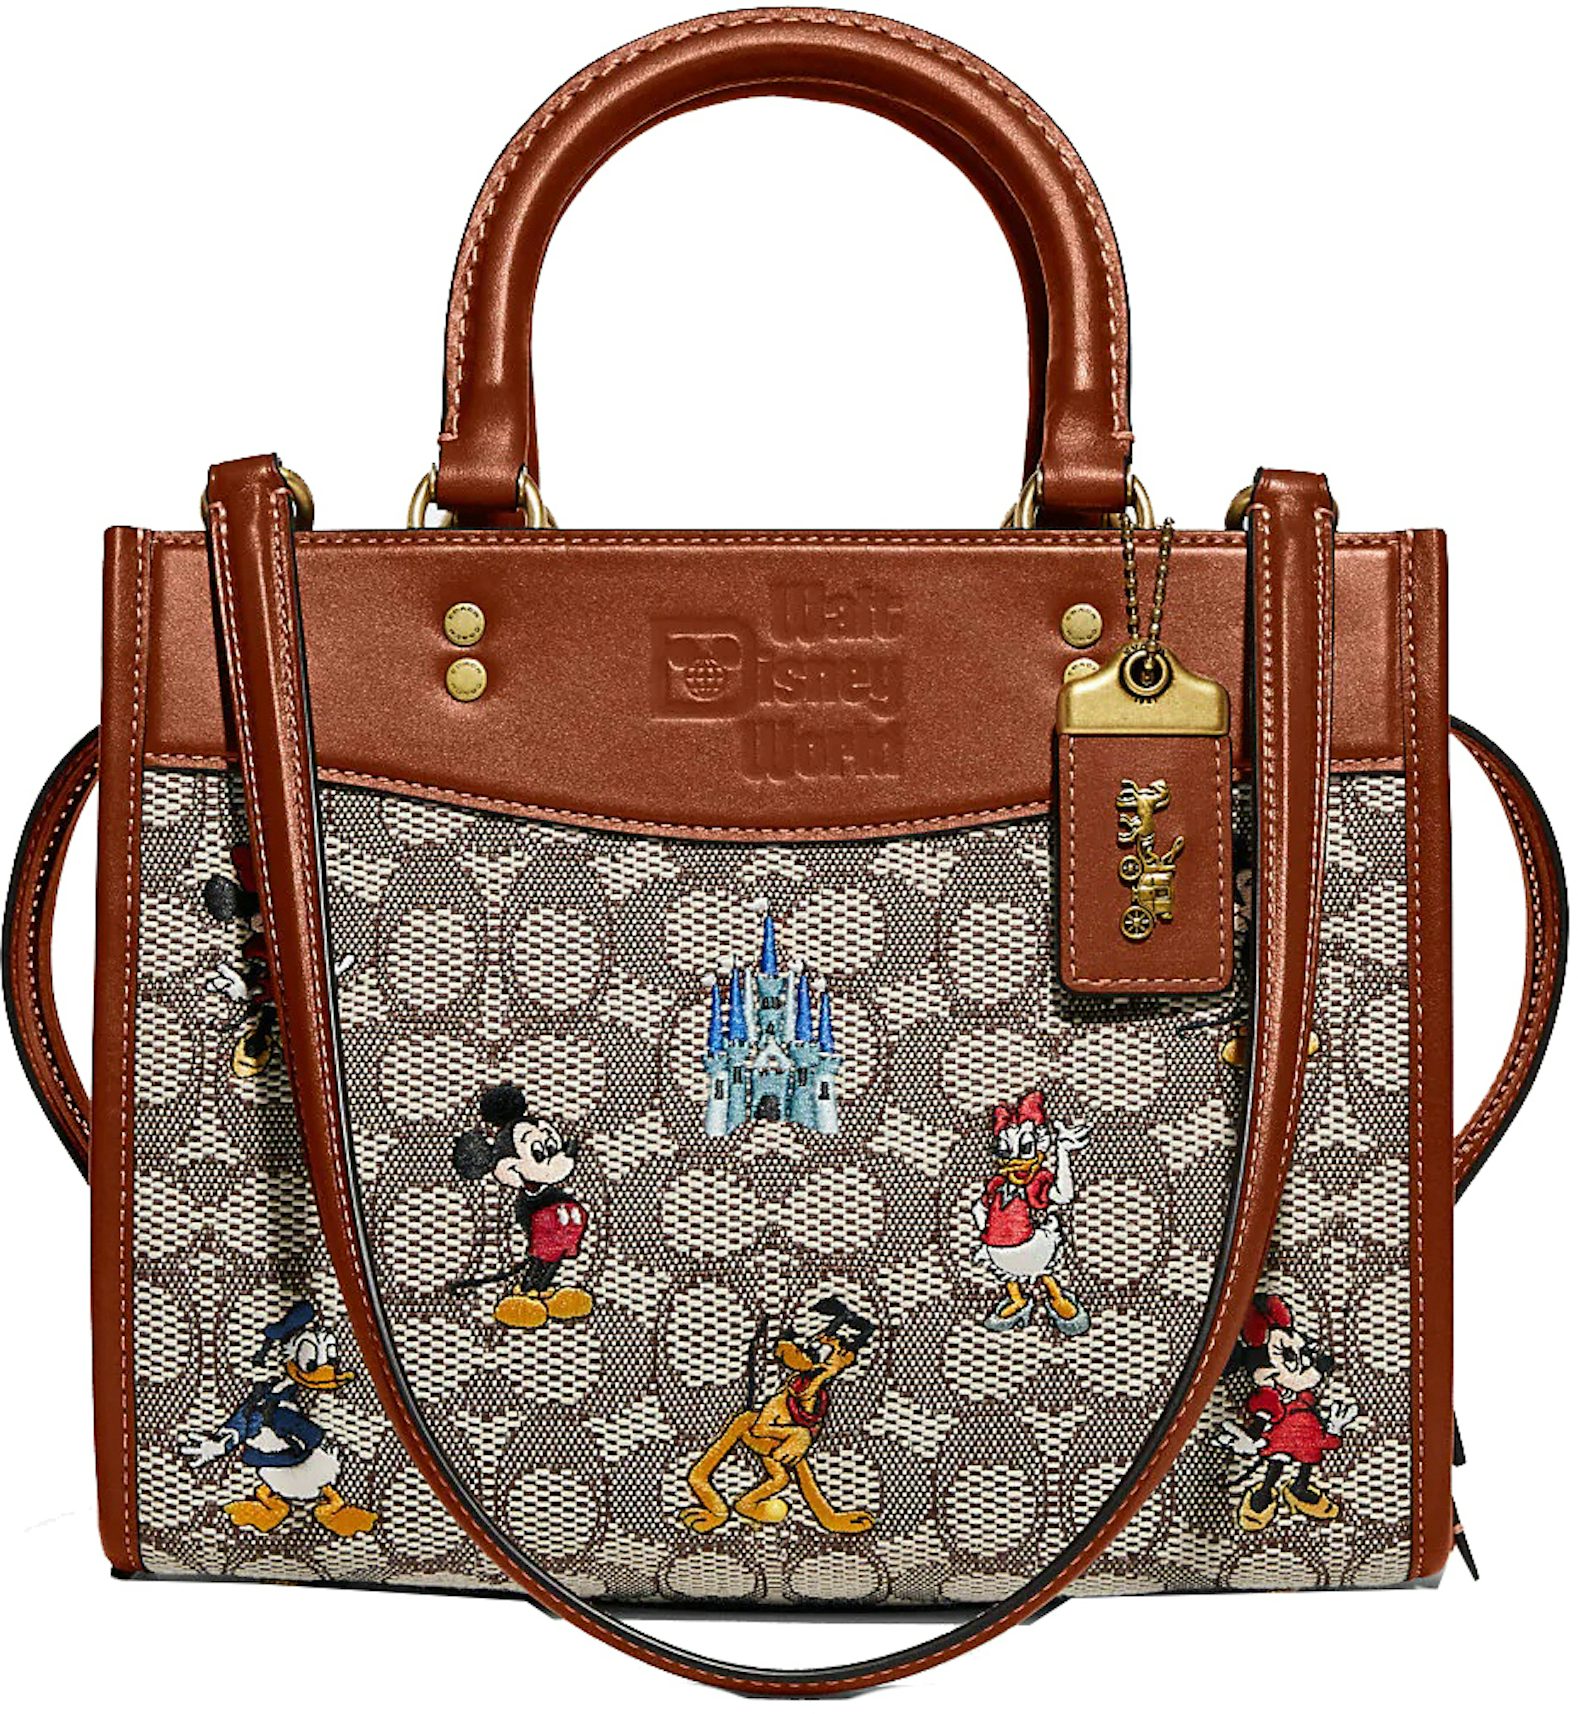 Coach x Disney Rogue 25 Cocoa/Multi in Canvas/Leather with Gold